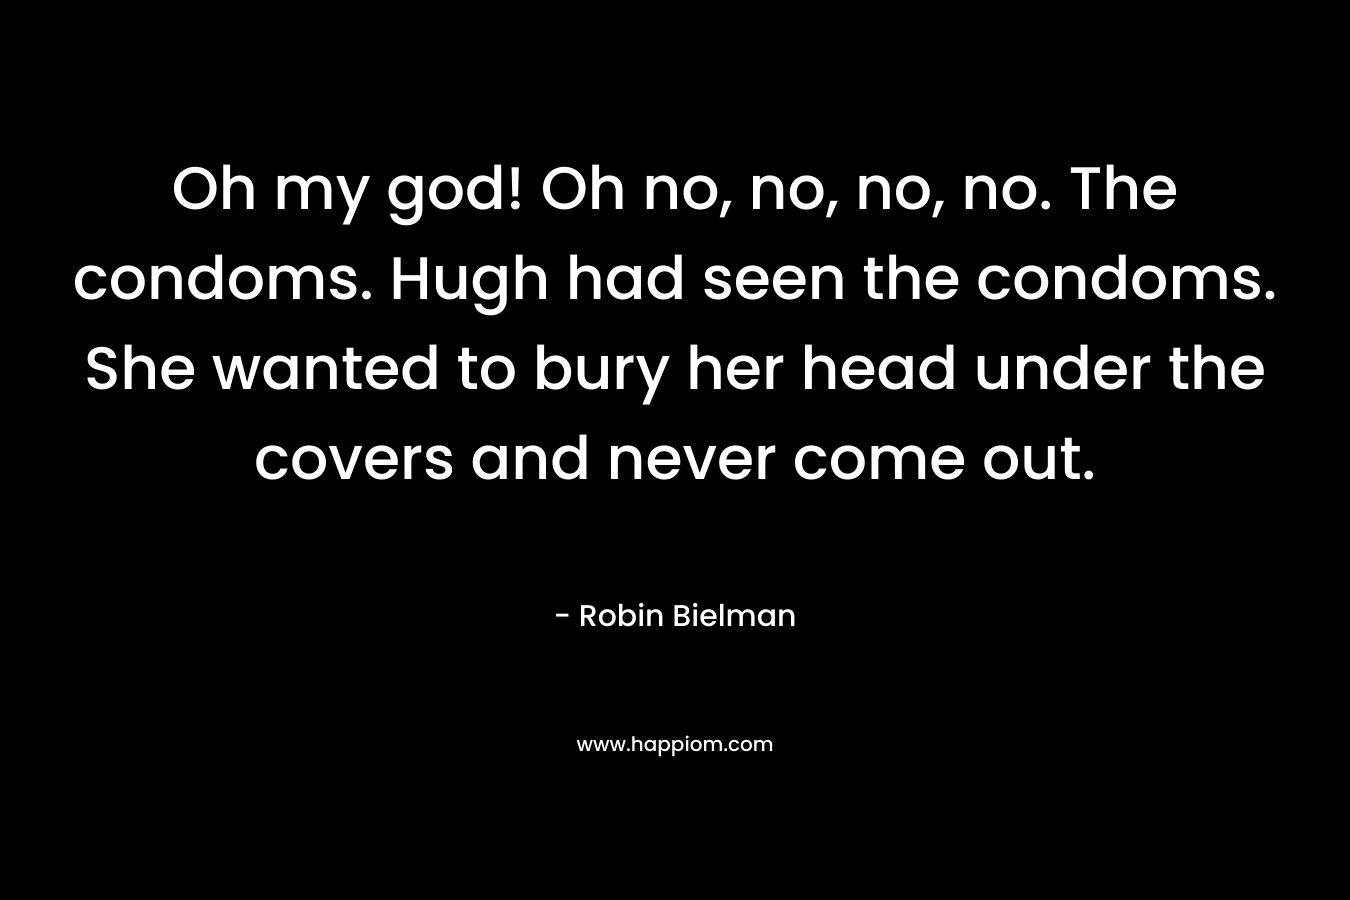 Oh my god! Oh no, no, no, no. The condoms. Hugh had seen the condoms. She wanted to bury her head under the covers and never come out. – Robin Bielman